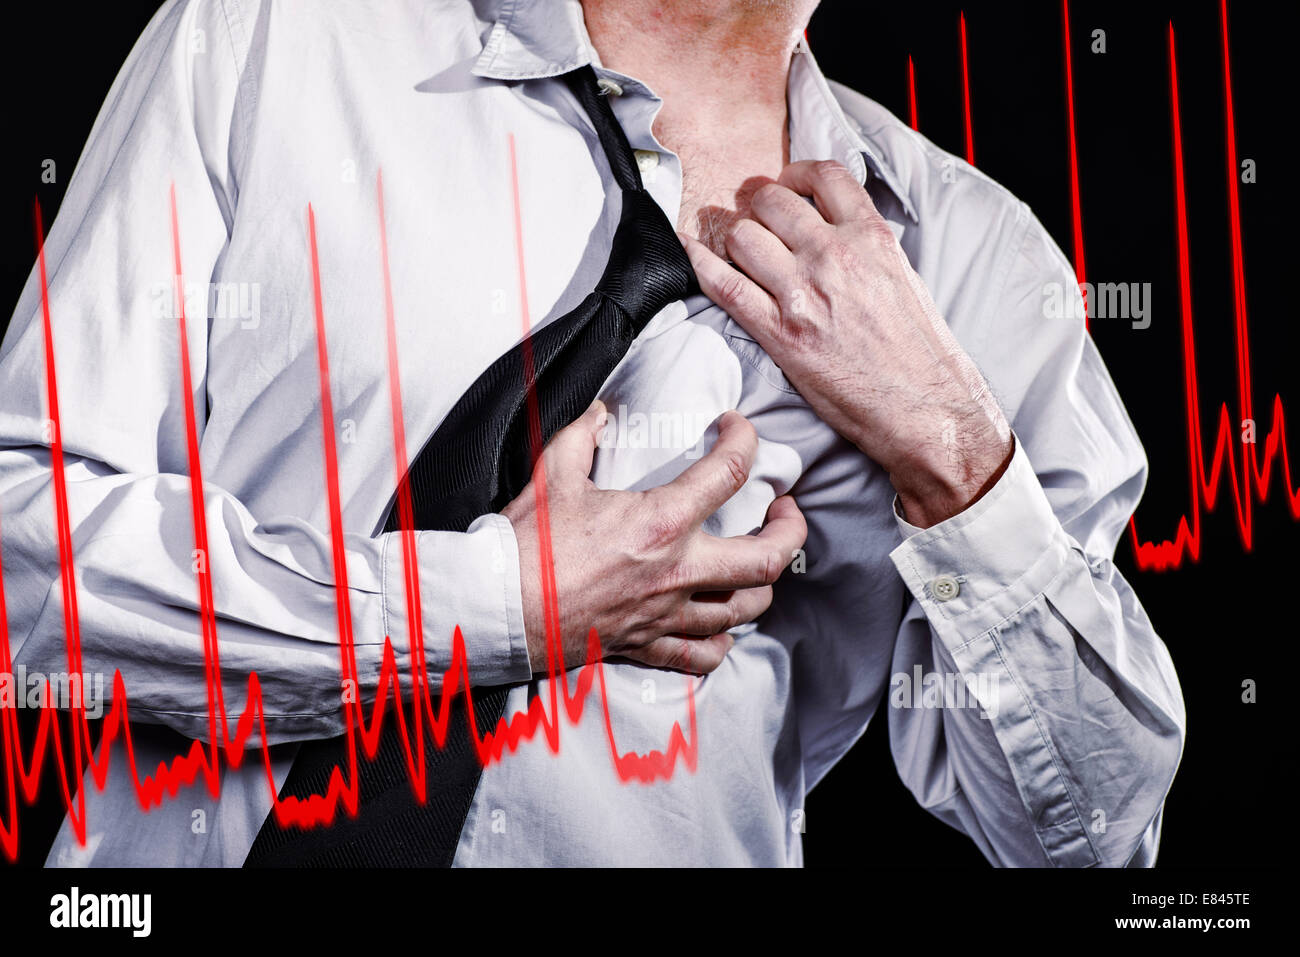 Man thumbs up with a cramped hand to his heart area and rips off his shirt. The curve of an ECG is shown. Stock Photo